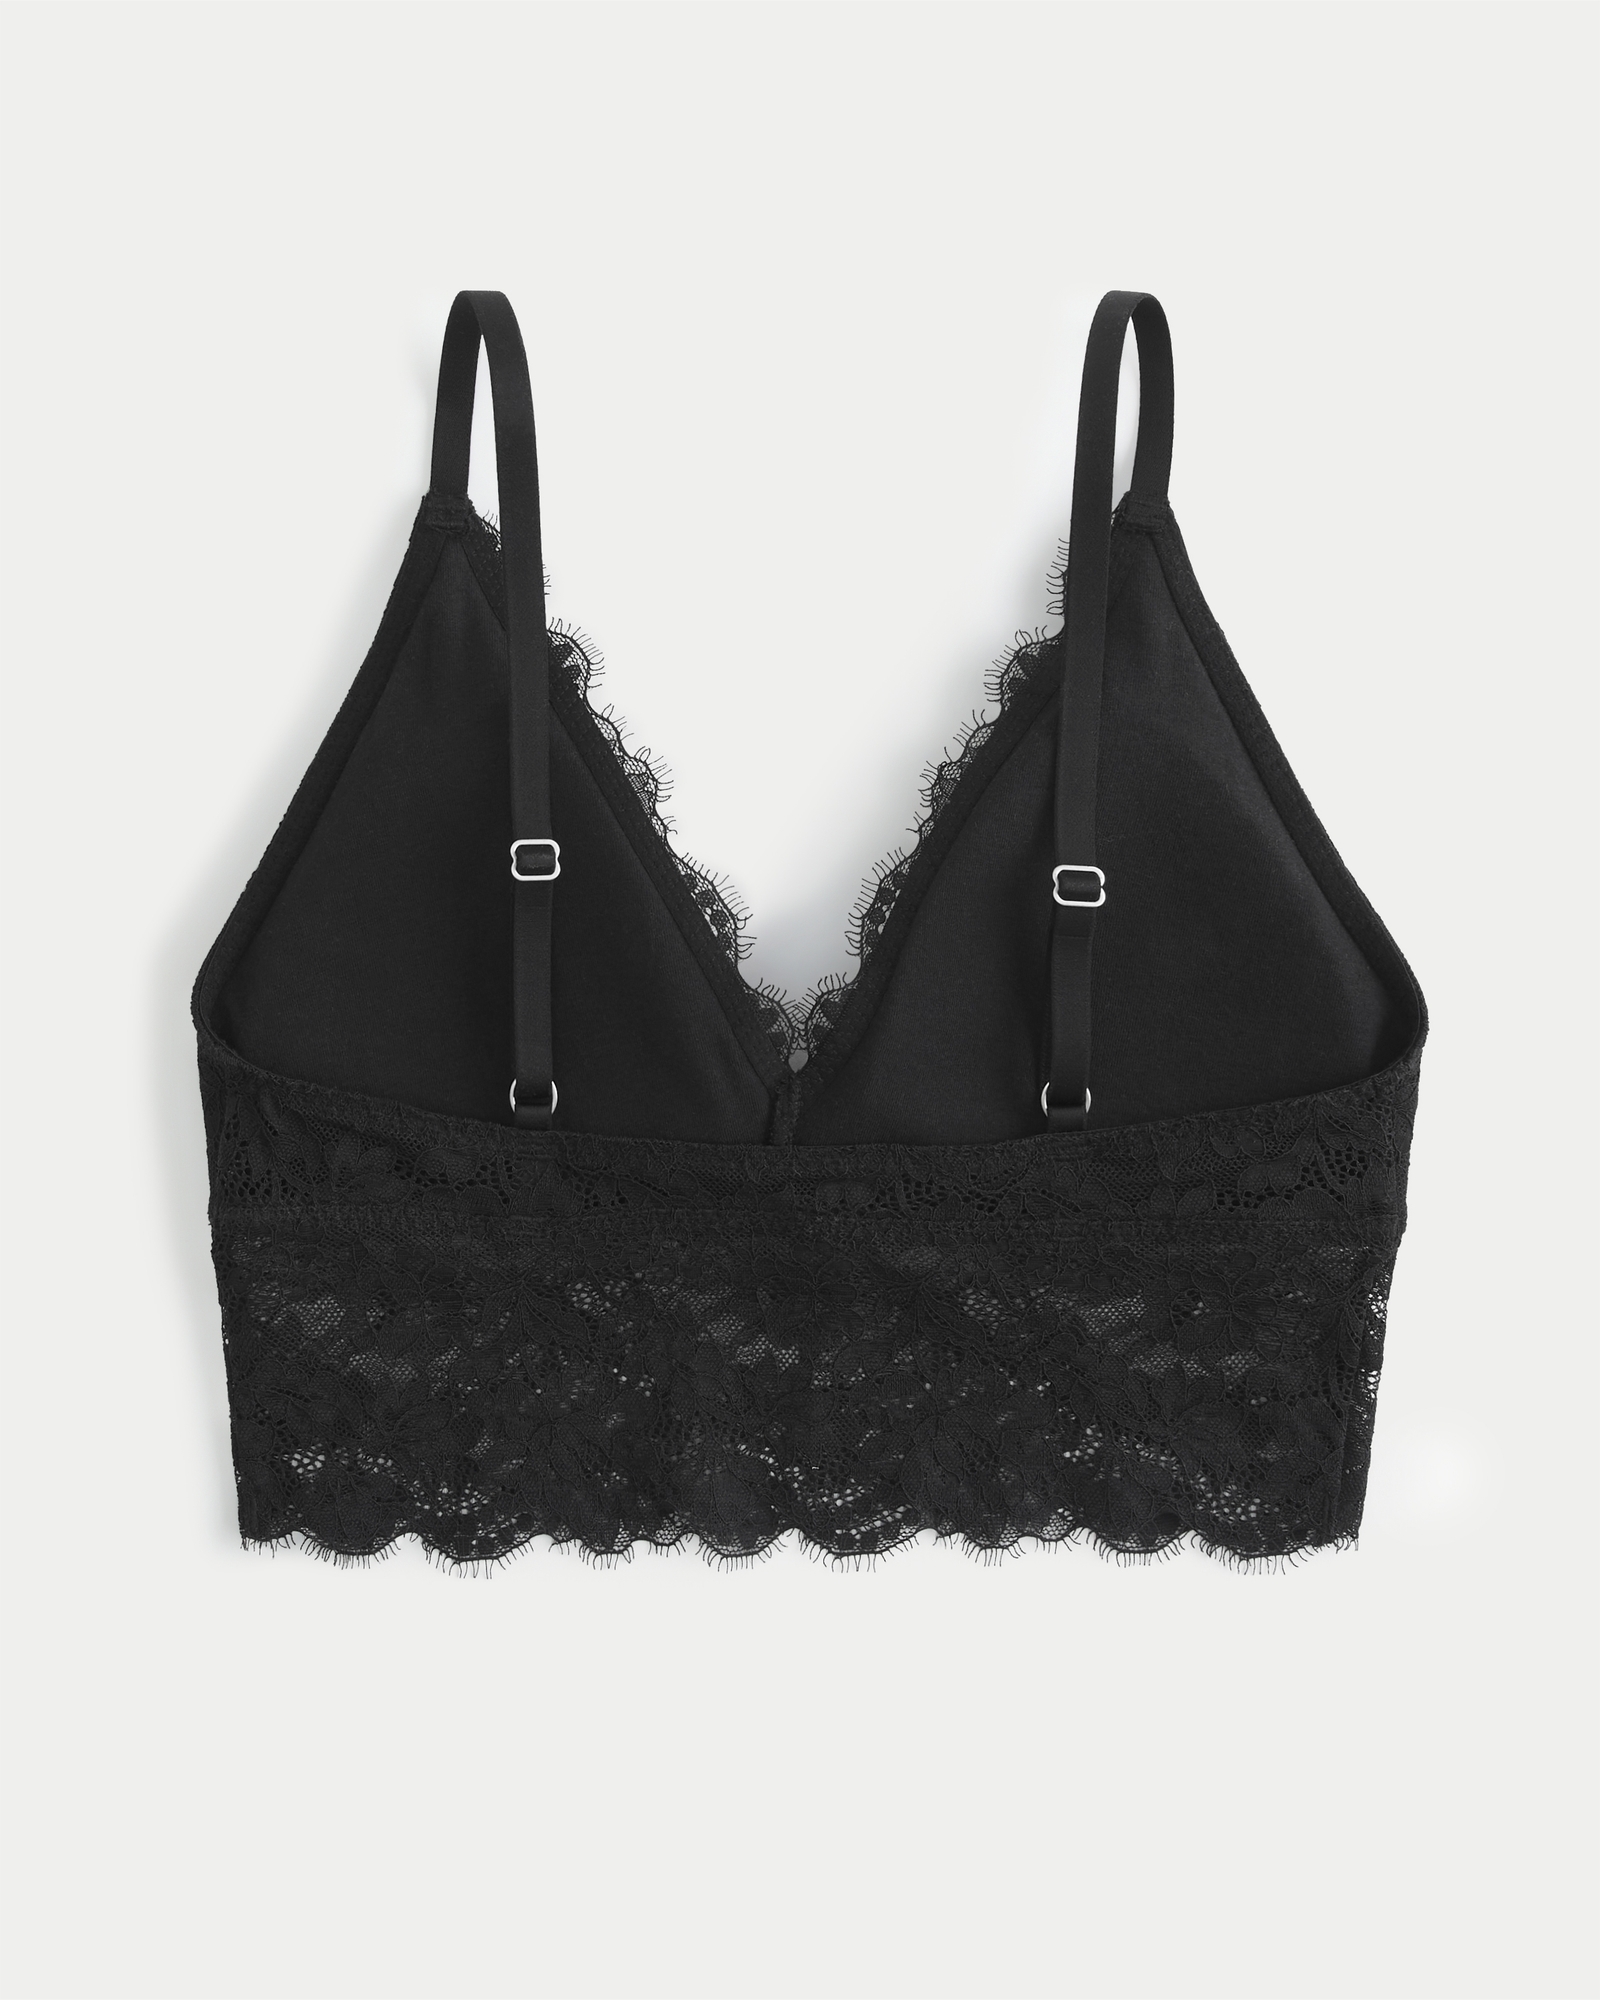 Hollister Lace Bralette Purple Size L - $13 (35% Off Retail) New With Tags  - From Alycia